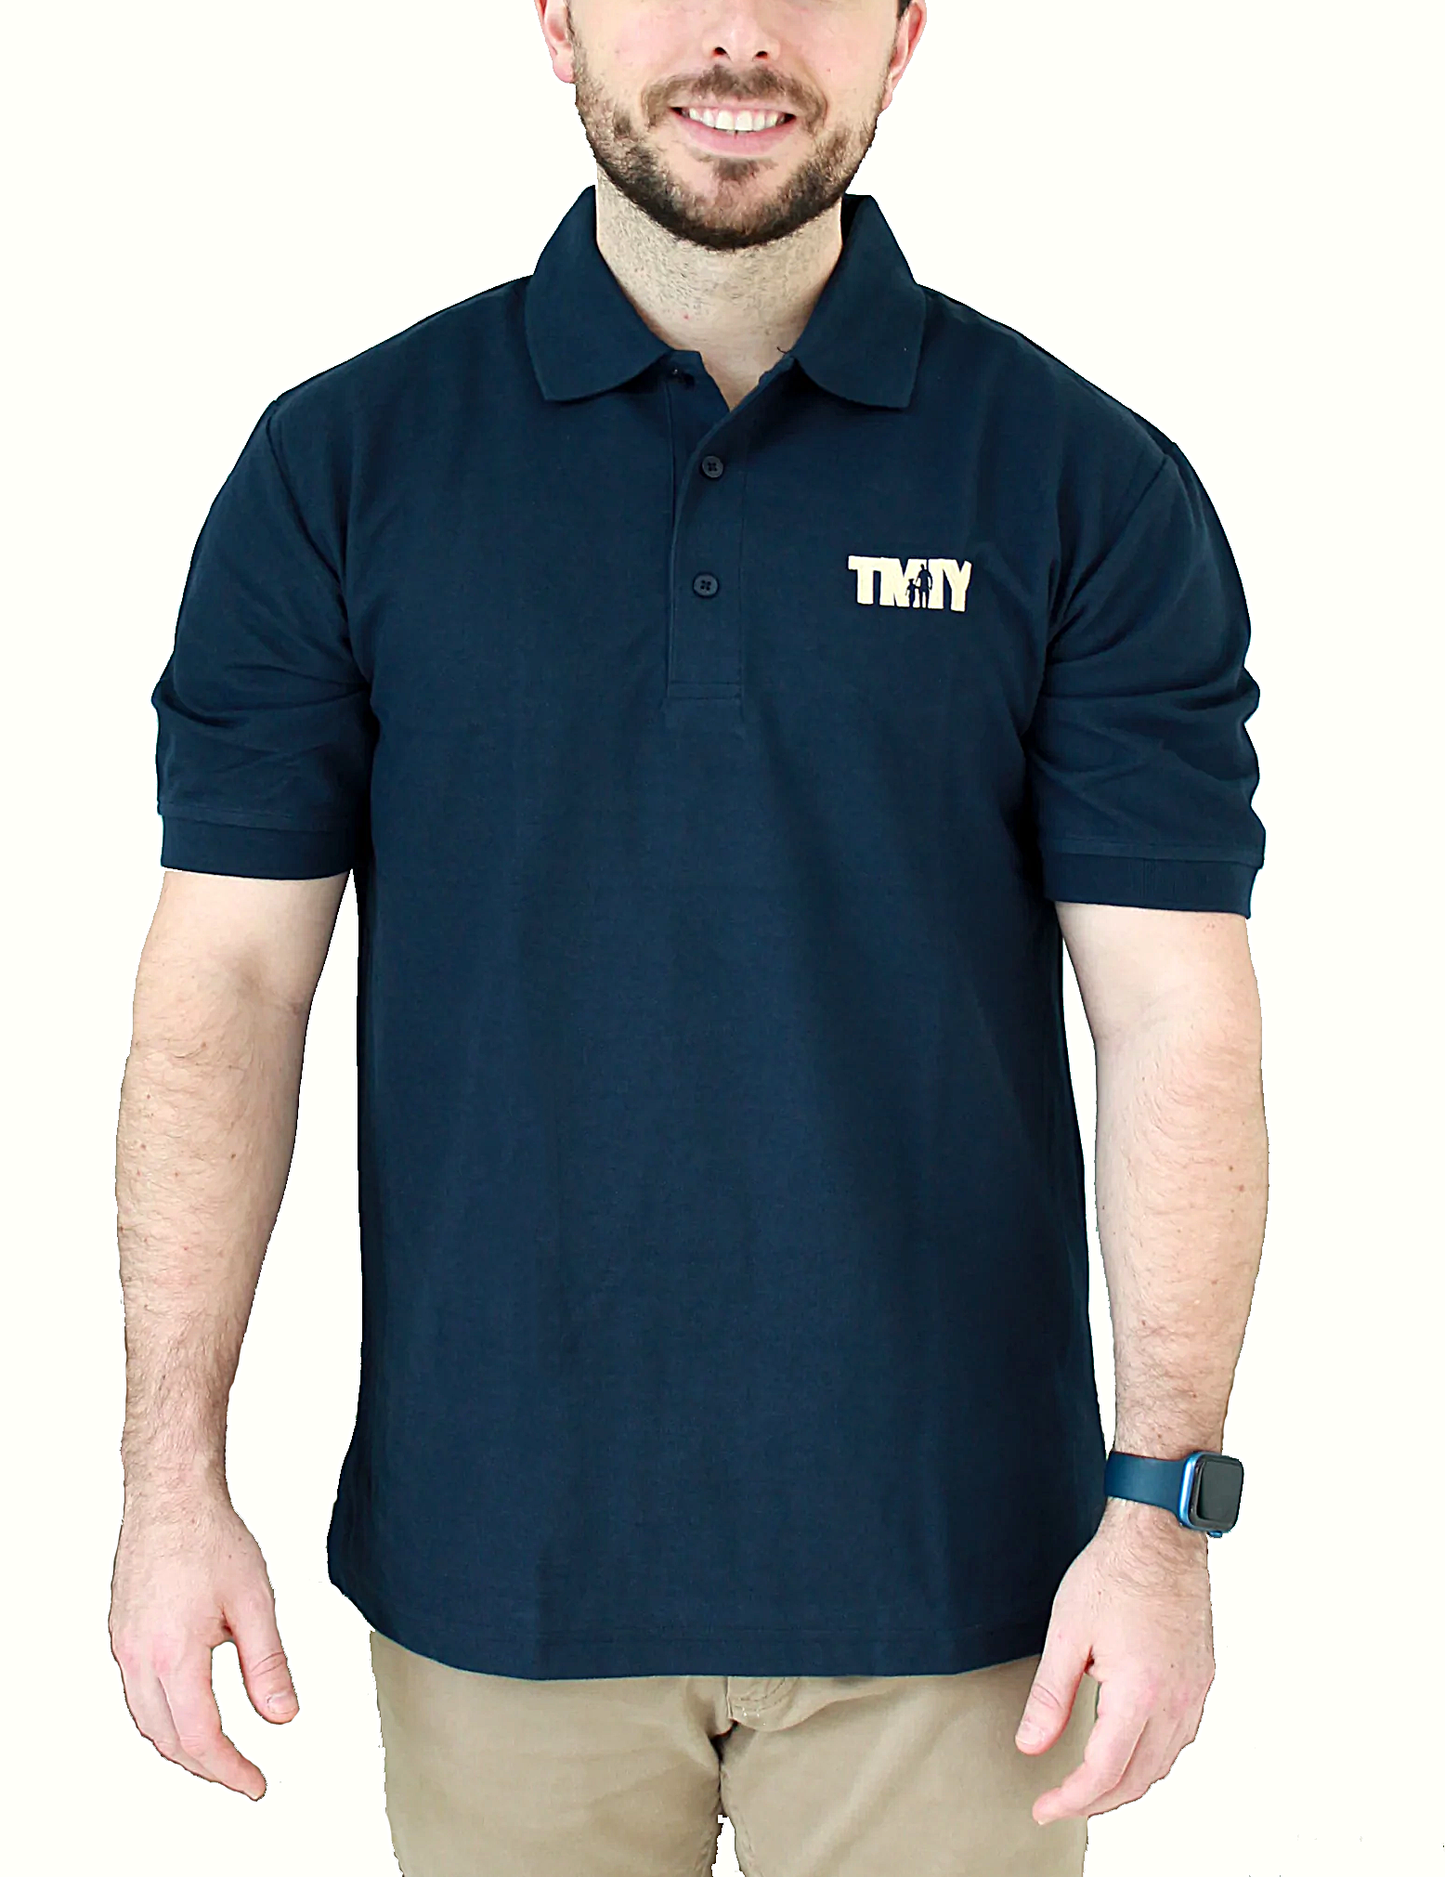 TMIY Core Team Embroidered Navy Blue Polo